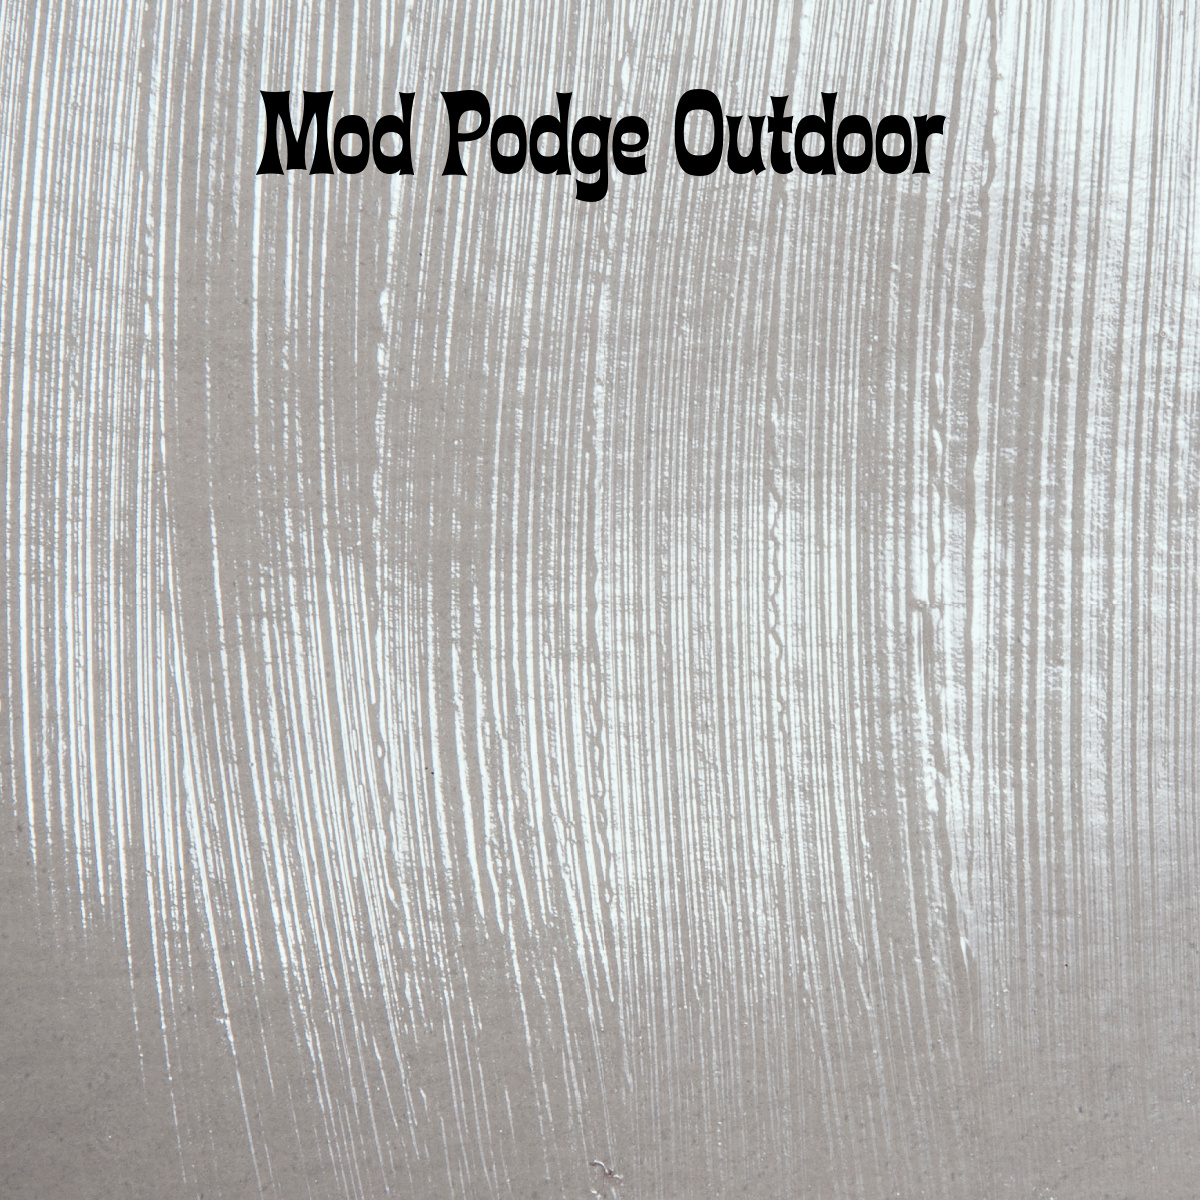 Mod Podge Outdoor swatch